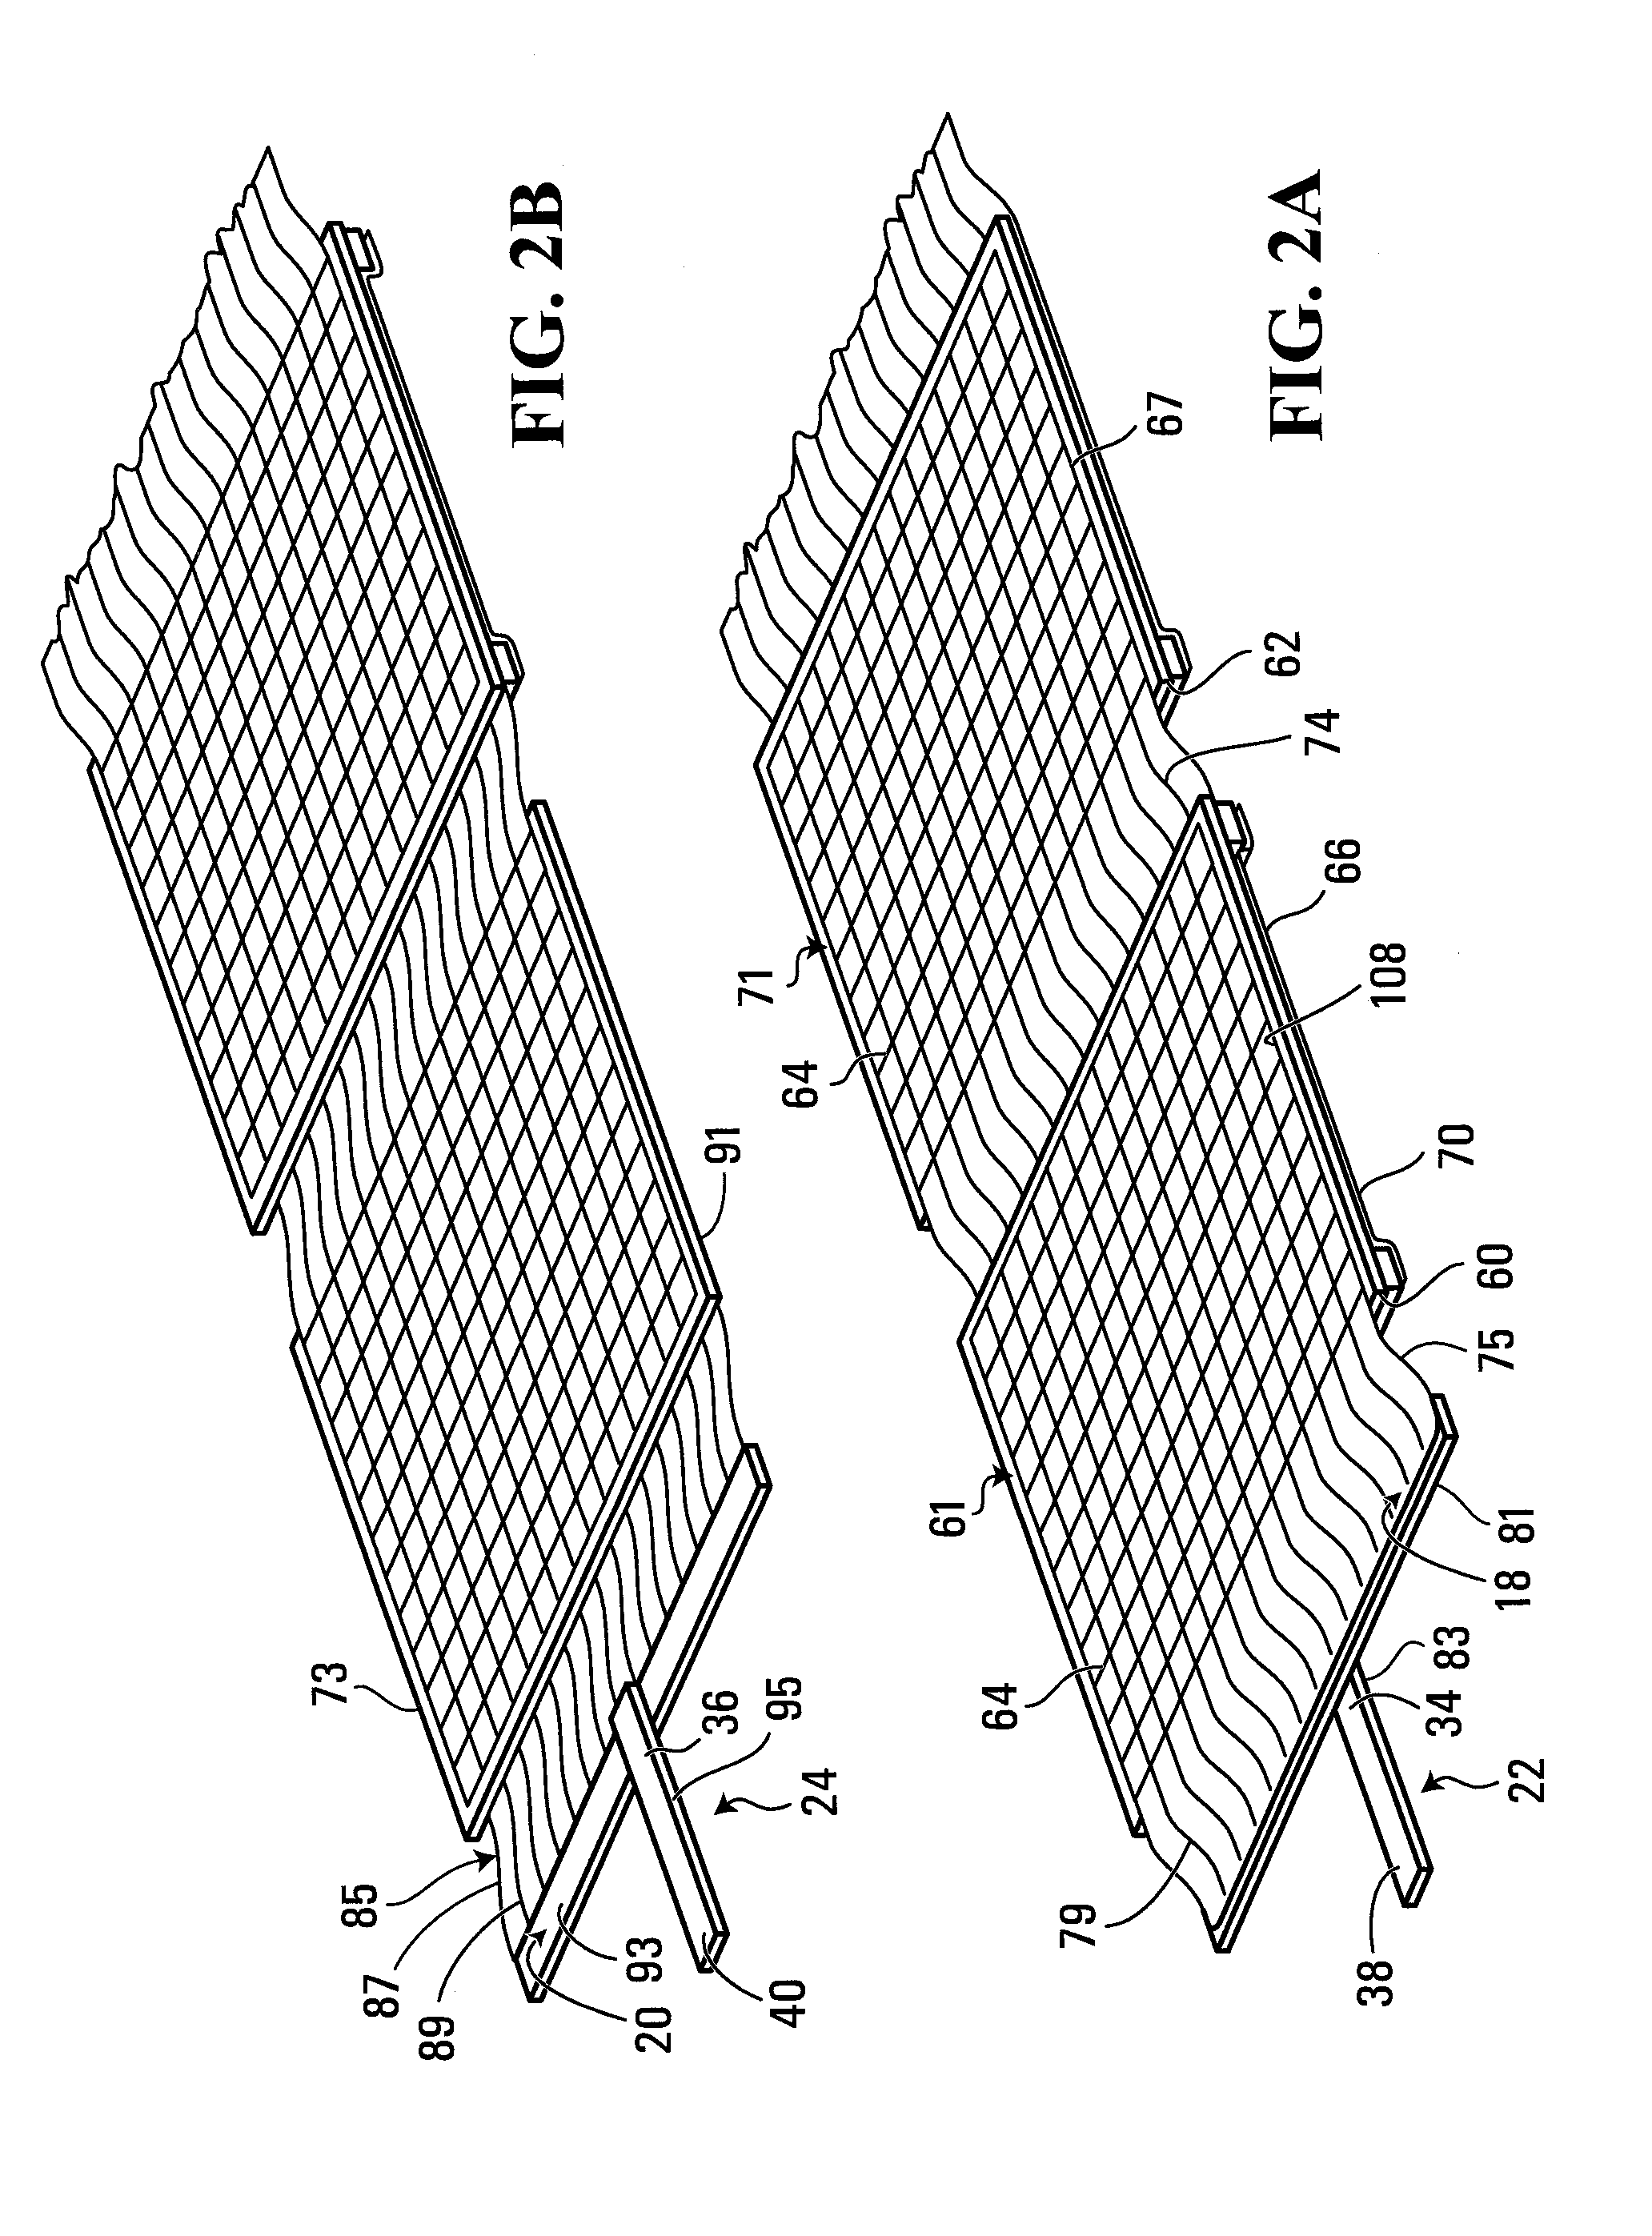 Photovoltaic module with edge access to pv strings, interconnection method, apparatus, and system